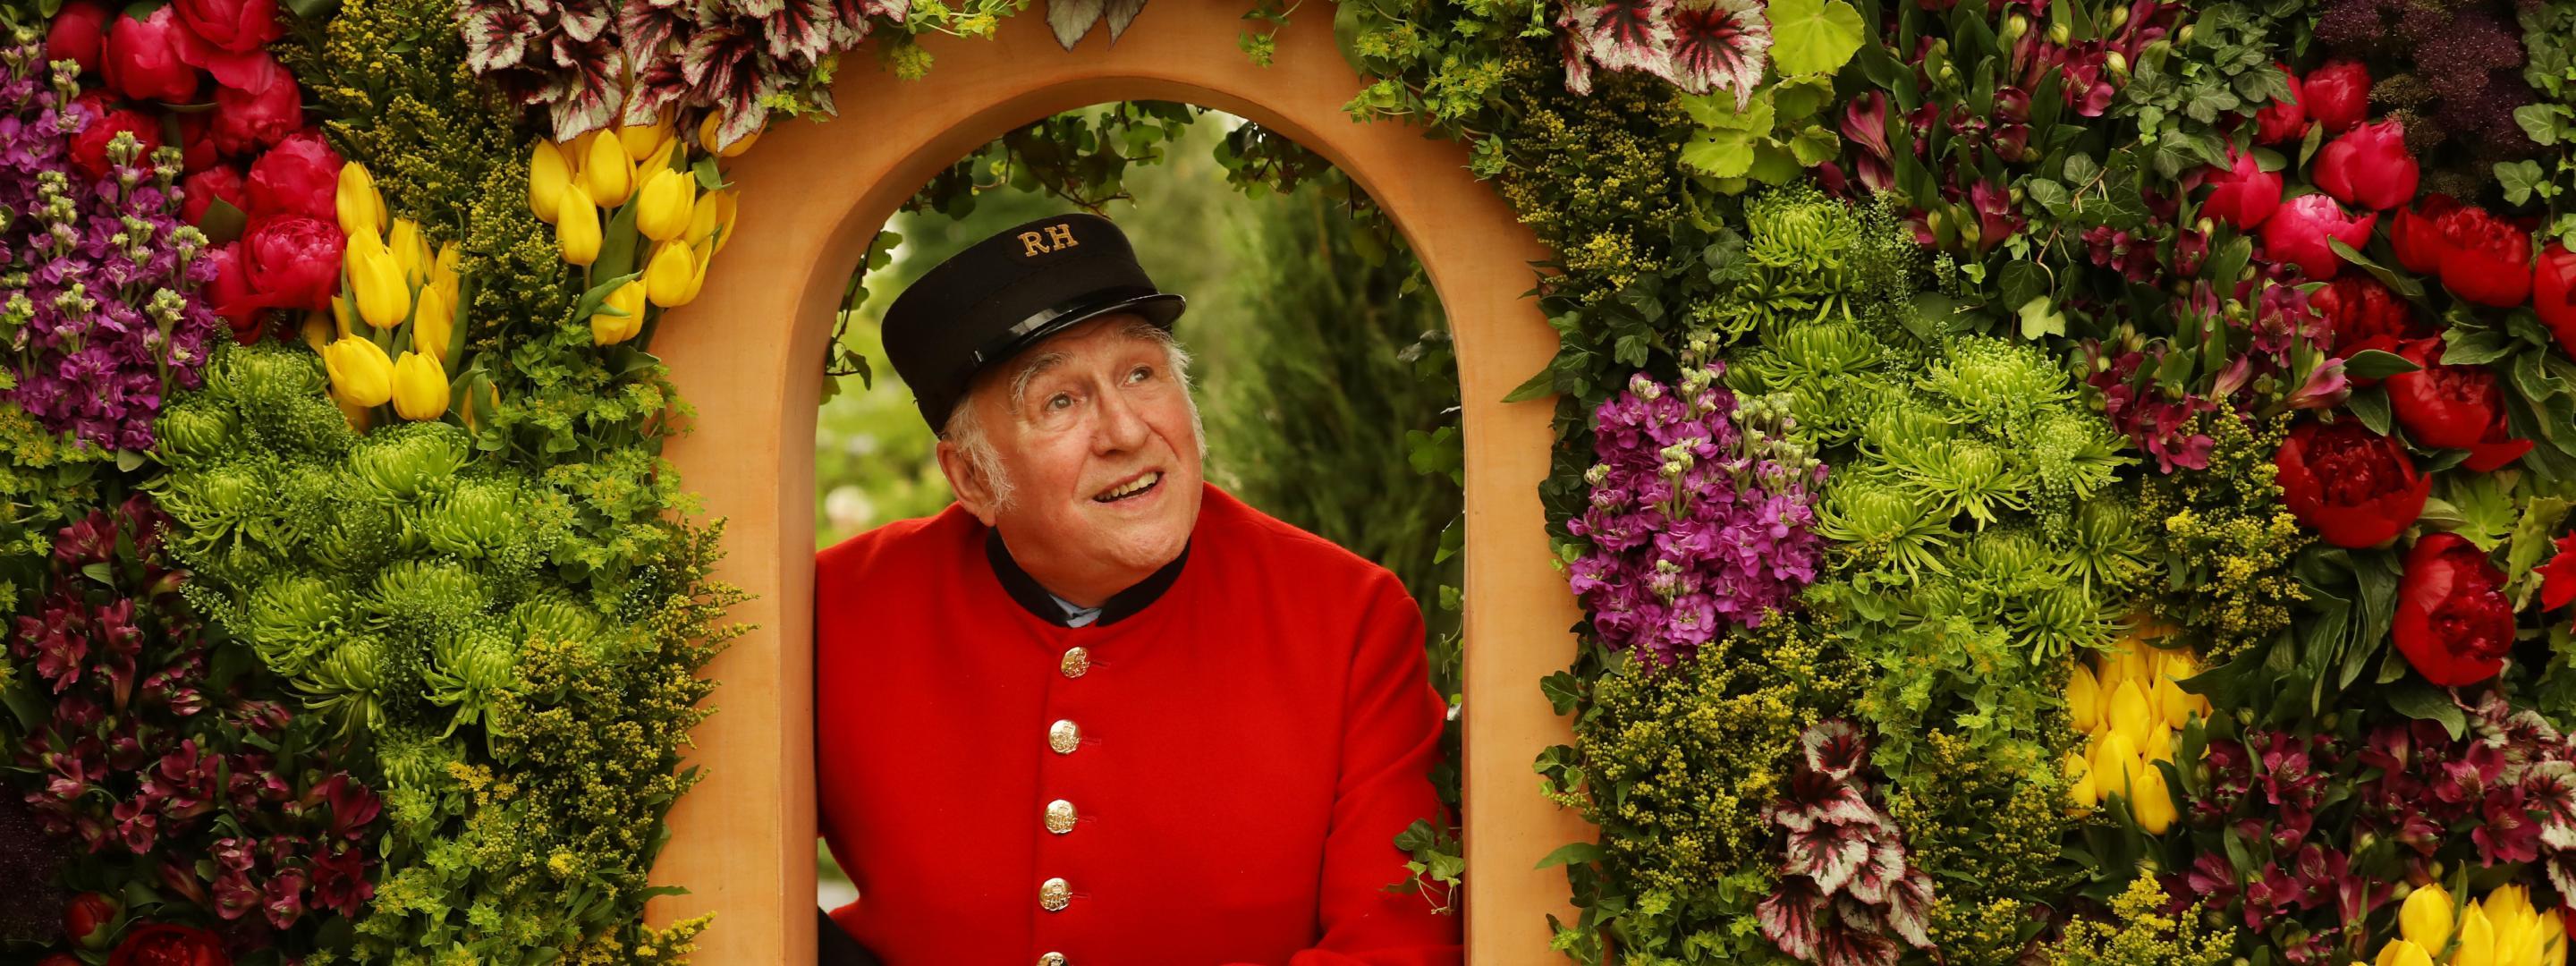 Pensioner in red and black RH uniform looking through gate surrounded by flowers